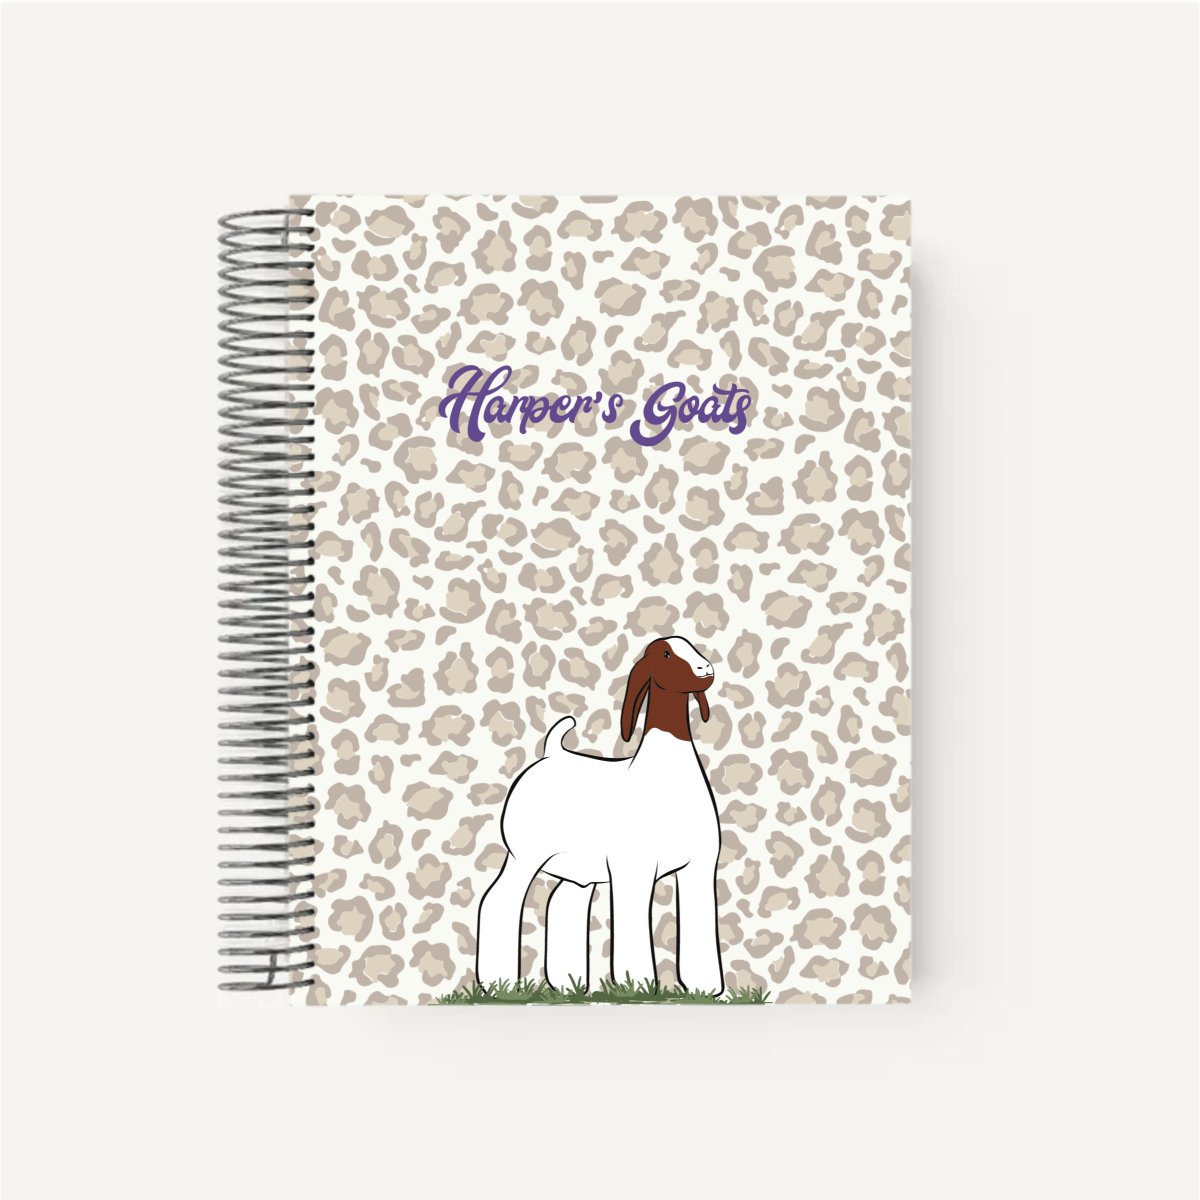 Personalized-Livestock-Animal Record Planner - Cheetah Cover